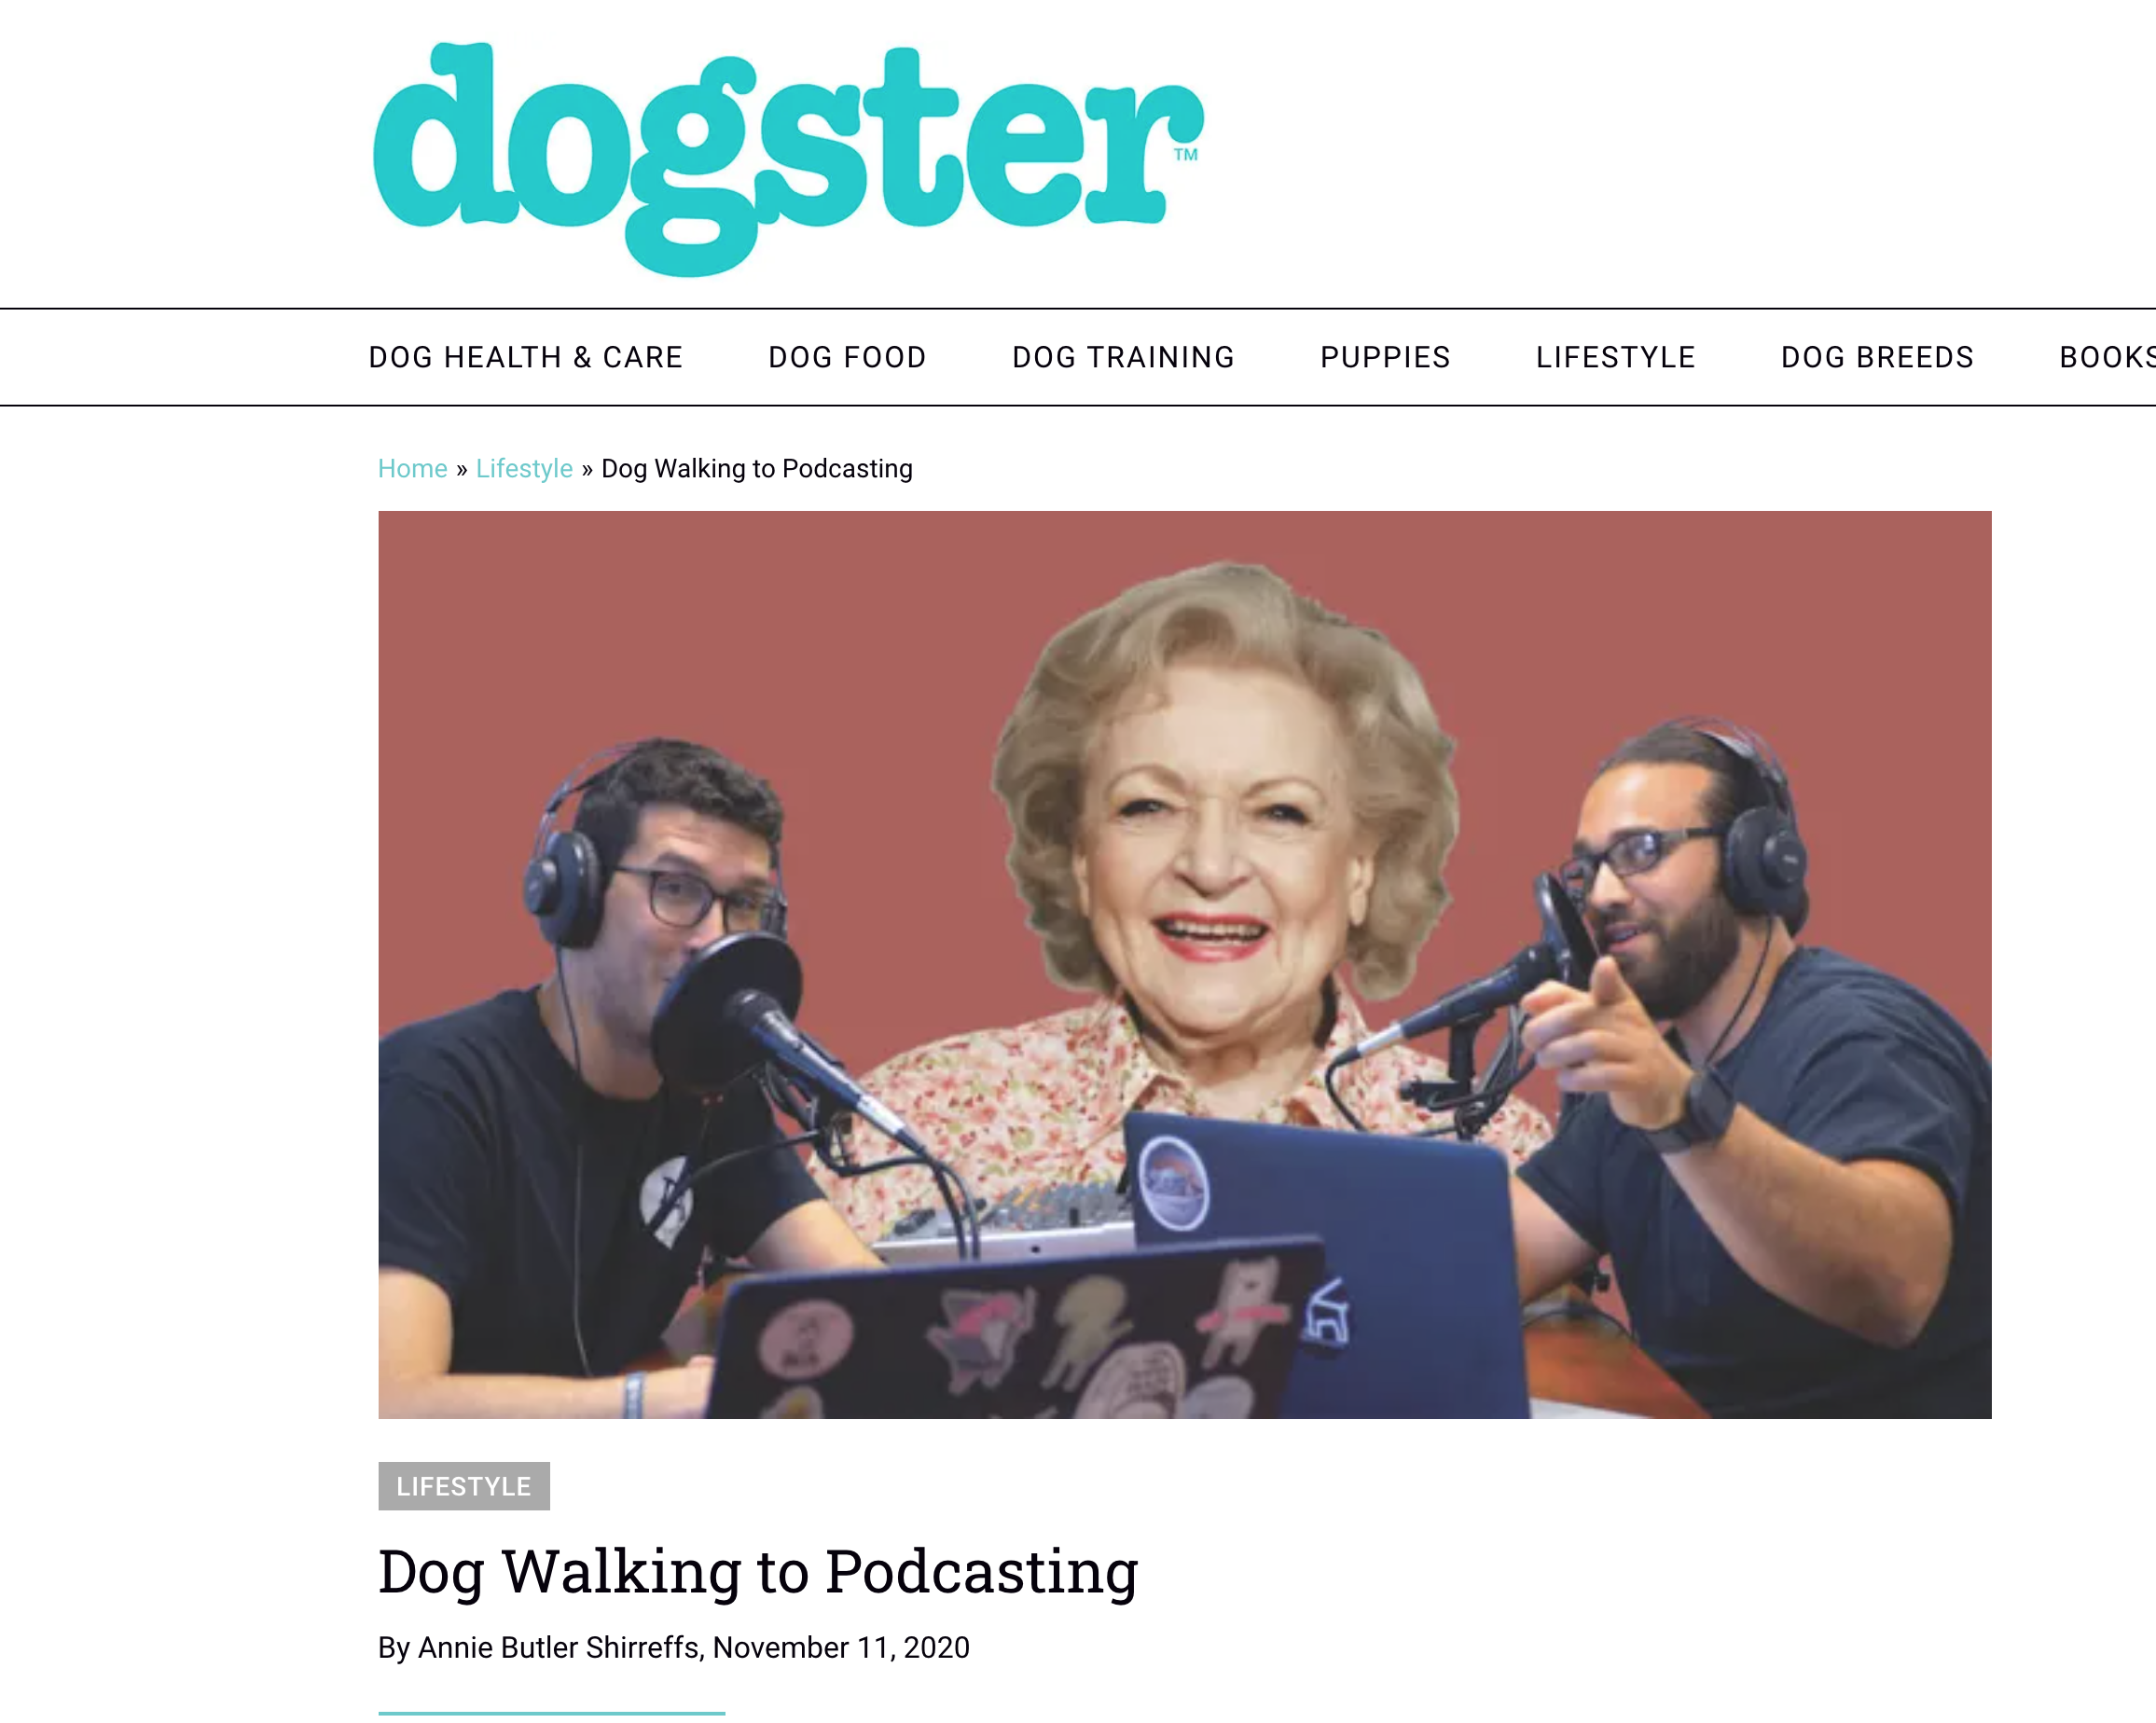 Let's Talk About Cool Animals on Dogster